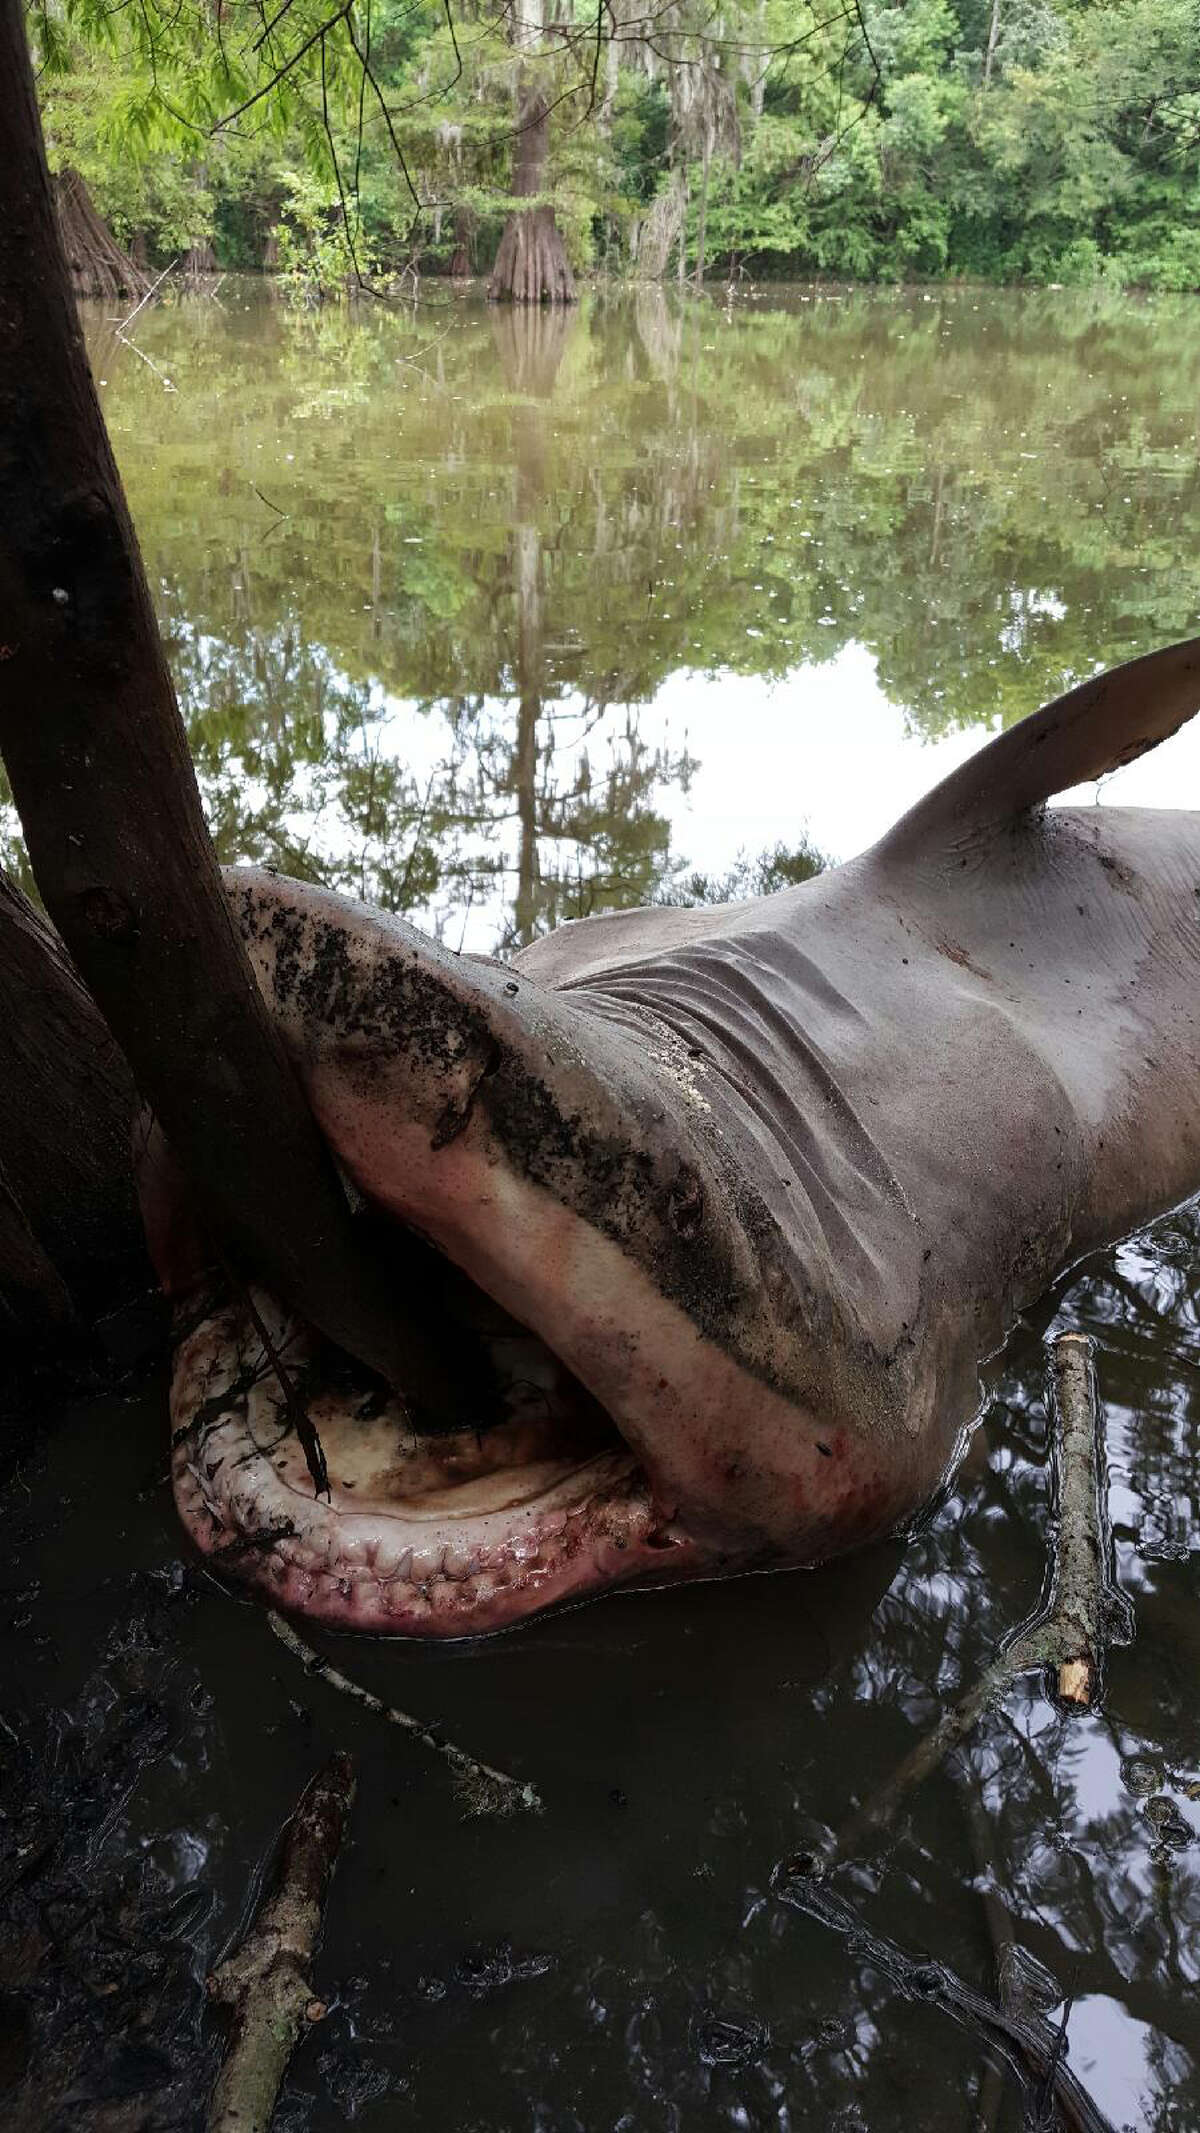 Liberty CountyThe decomposing remains of a bull shark were found in a lake near Kenefick in Liberty County in July, leaving residents to wonder whether it could have swam all the way from the Gulf. Bull sharks are known for swimming many miles into freshwater rivers and streams but authorities later determined the shark was dumped in the lake.